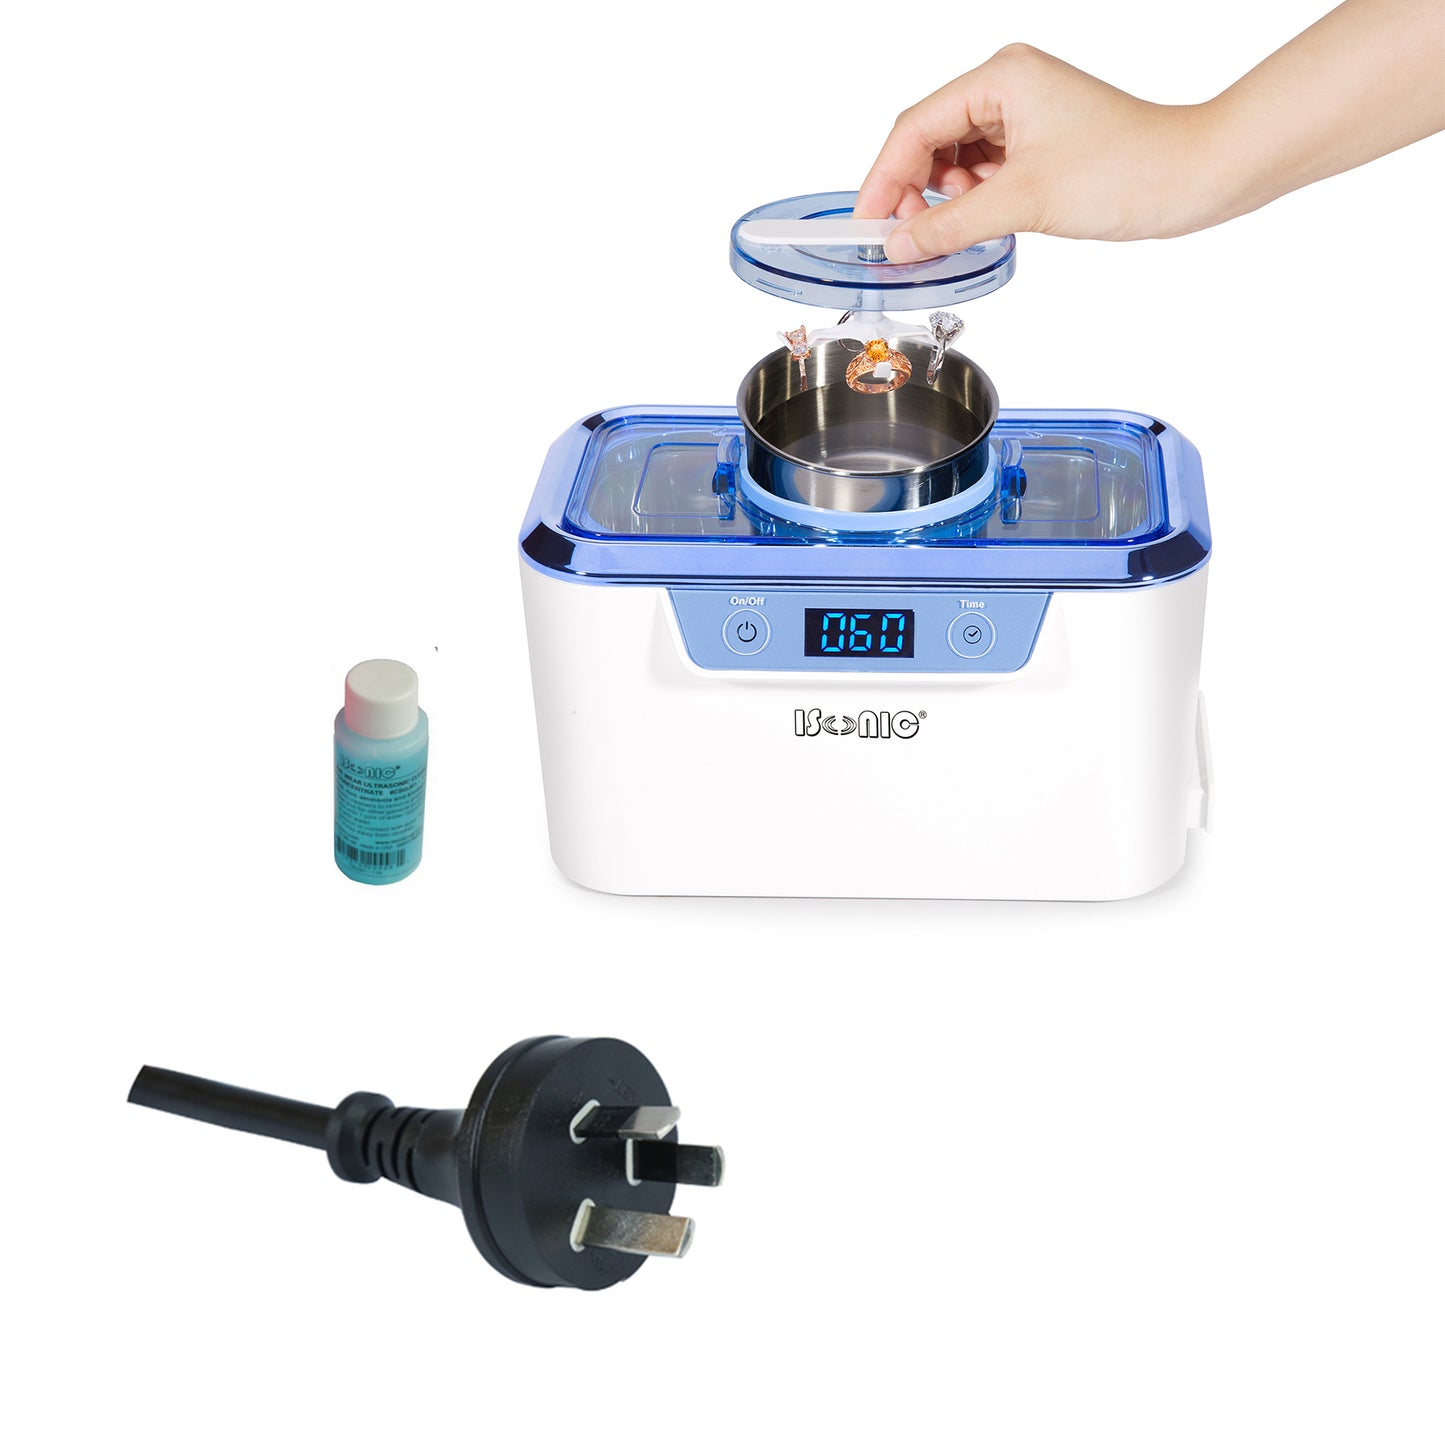 DS310-WS | iSonic® Miniaturized Commercial Ultrasonic Cleaner, white and sapphire blue colors